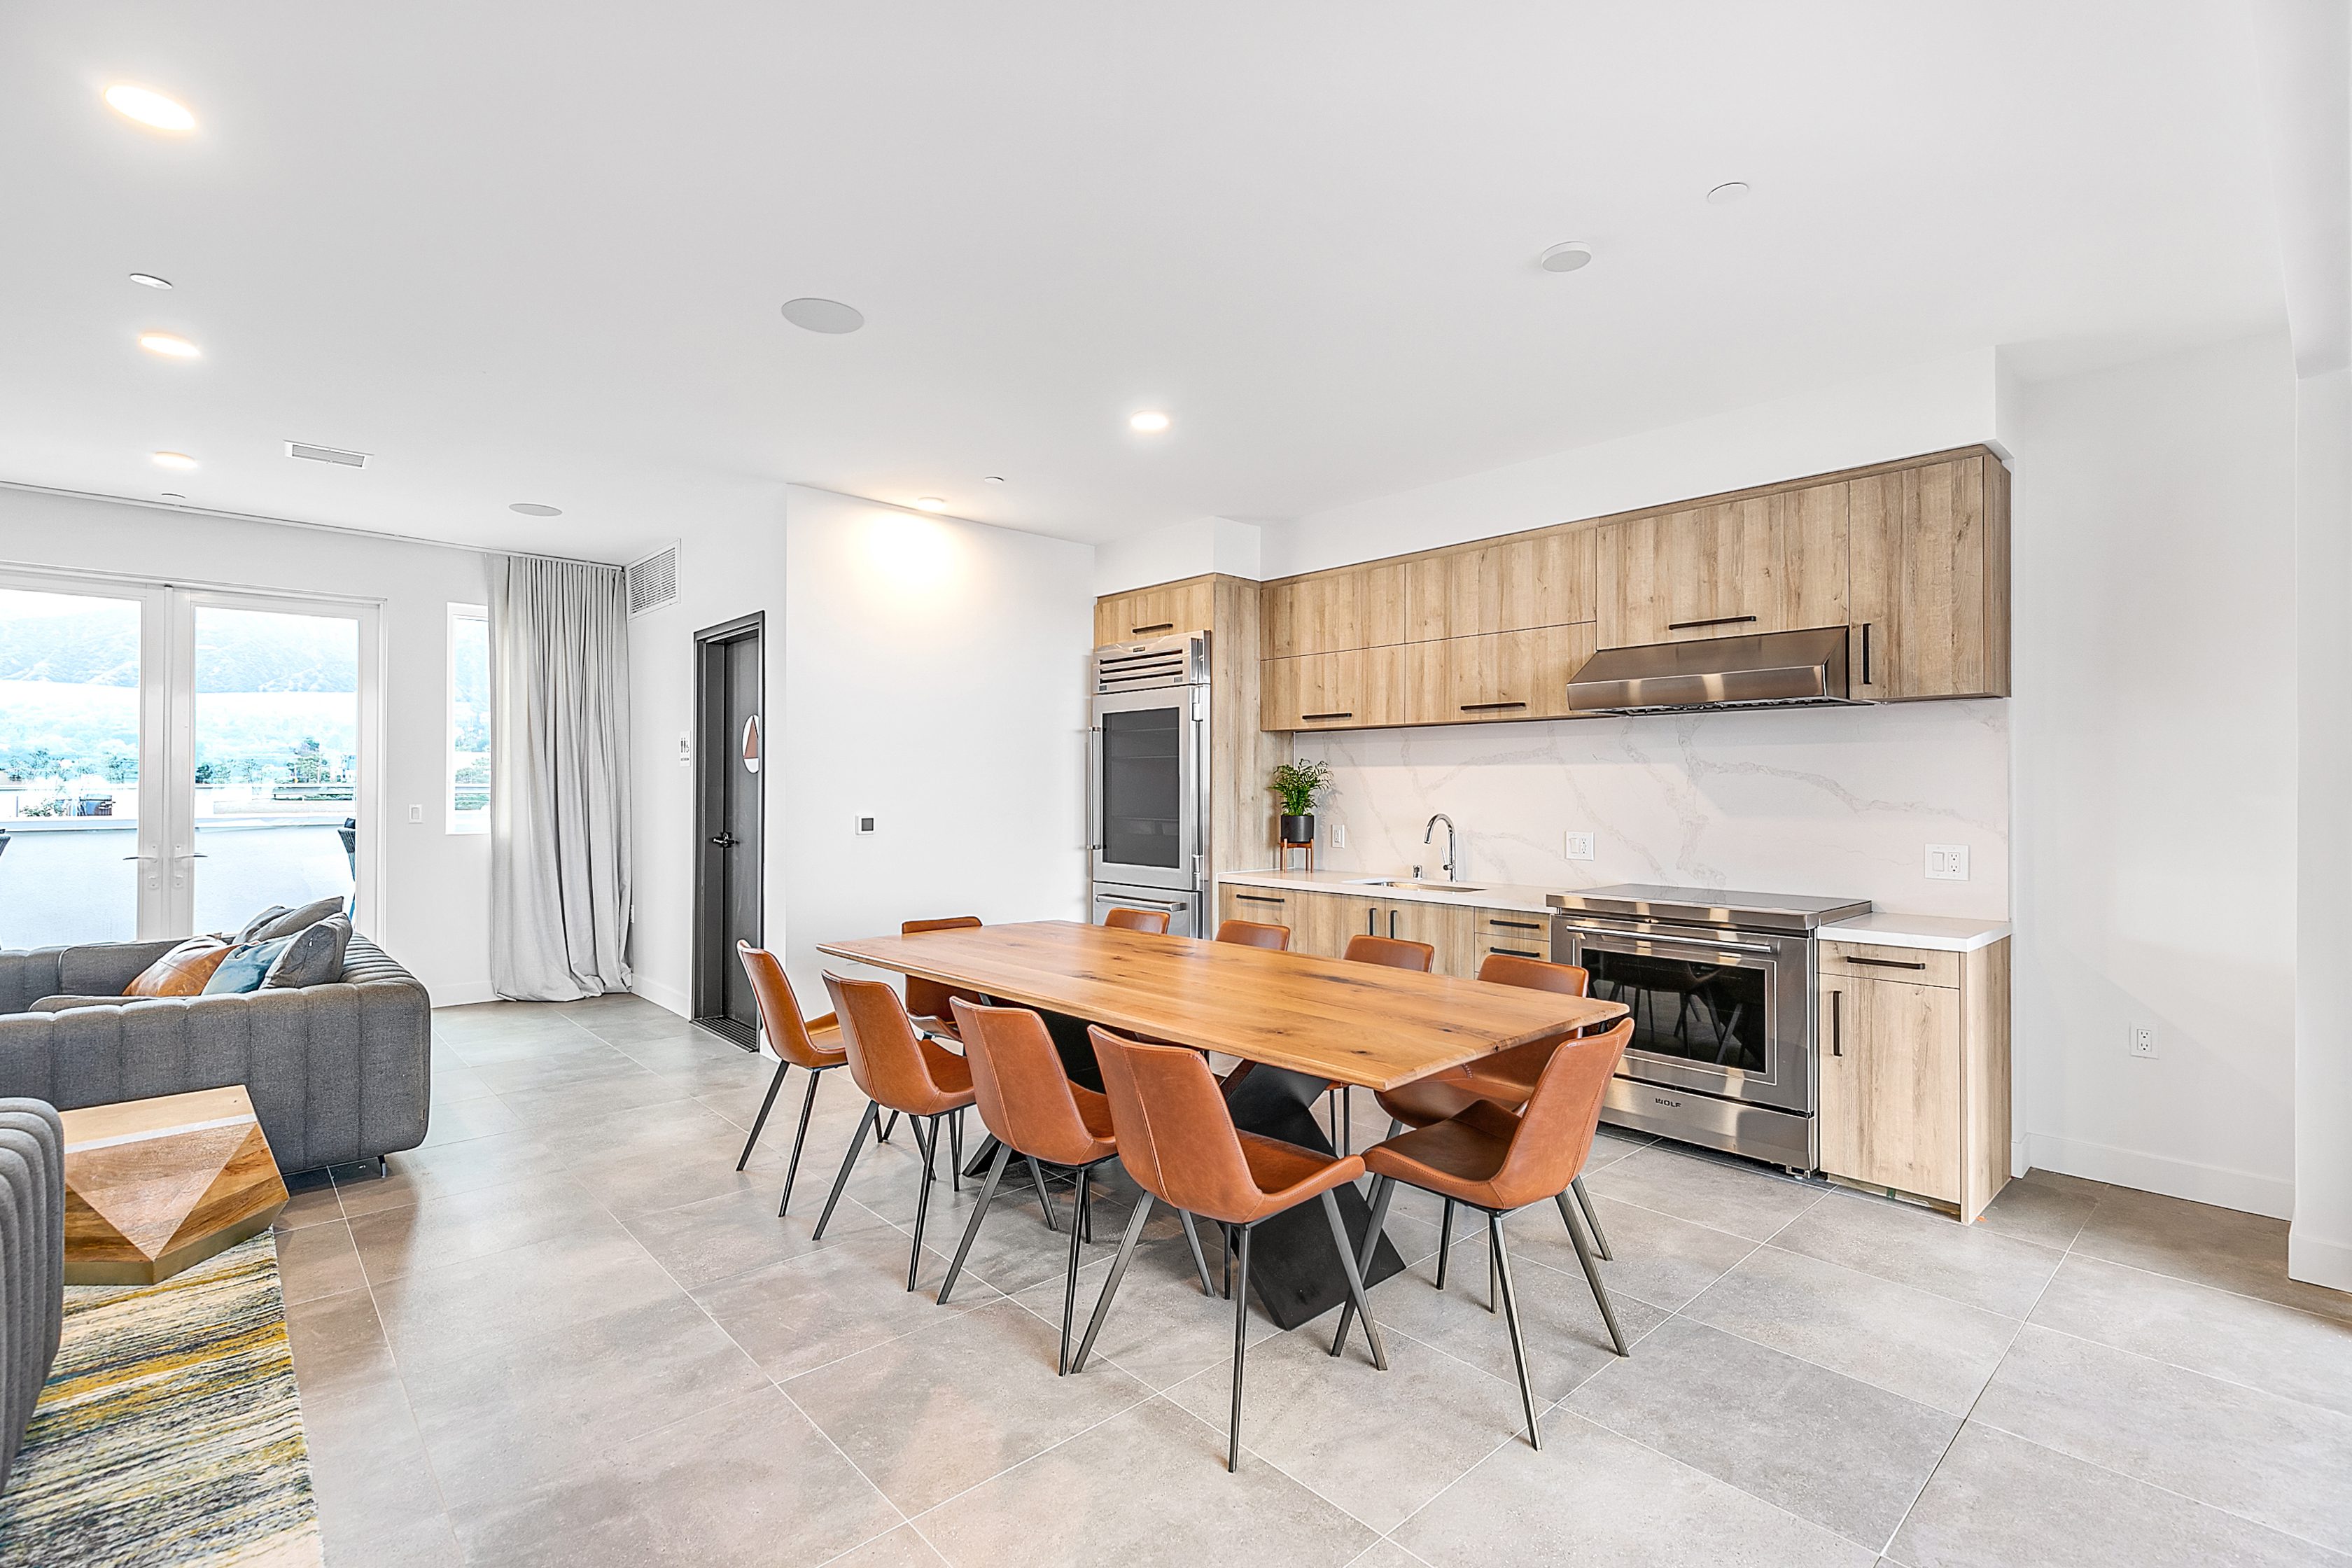 The Rinrose: A multifamily apartment with a modern kitchen and dining area.